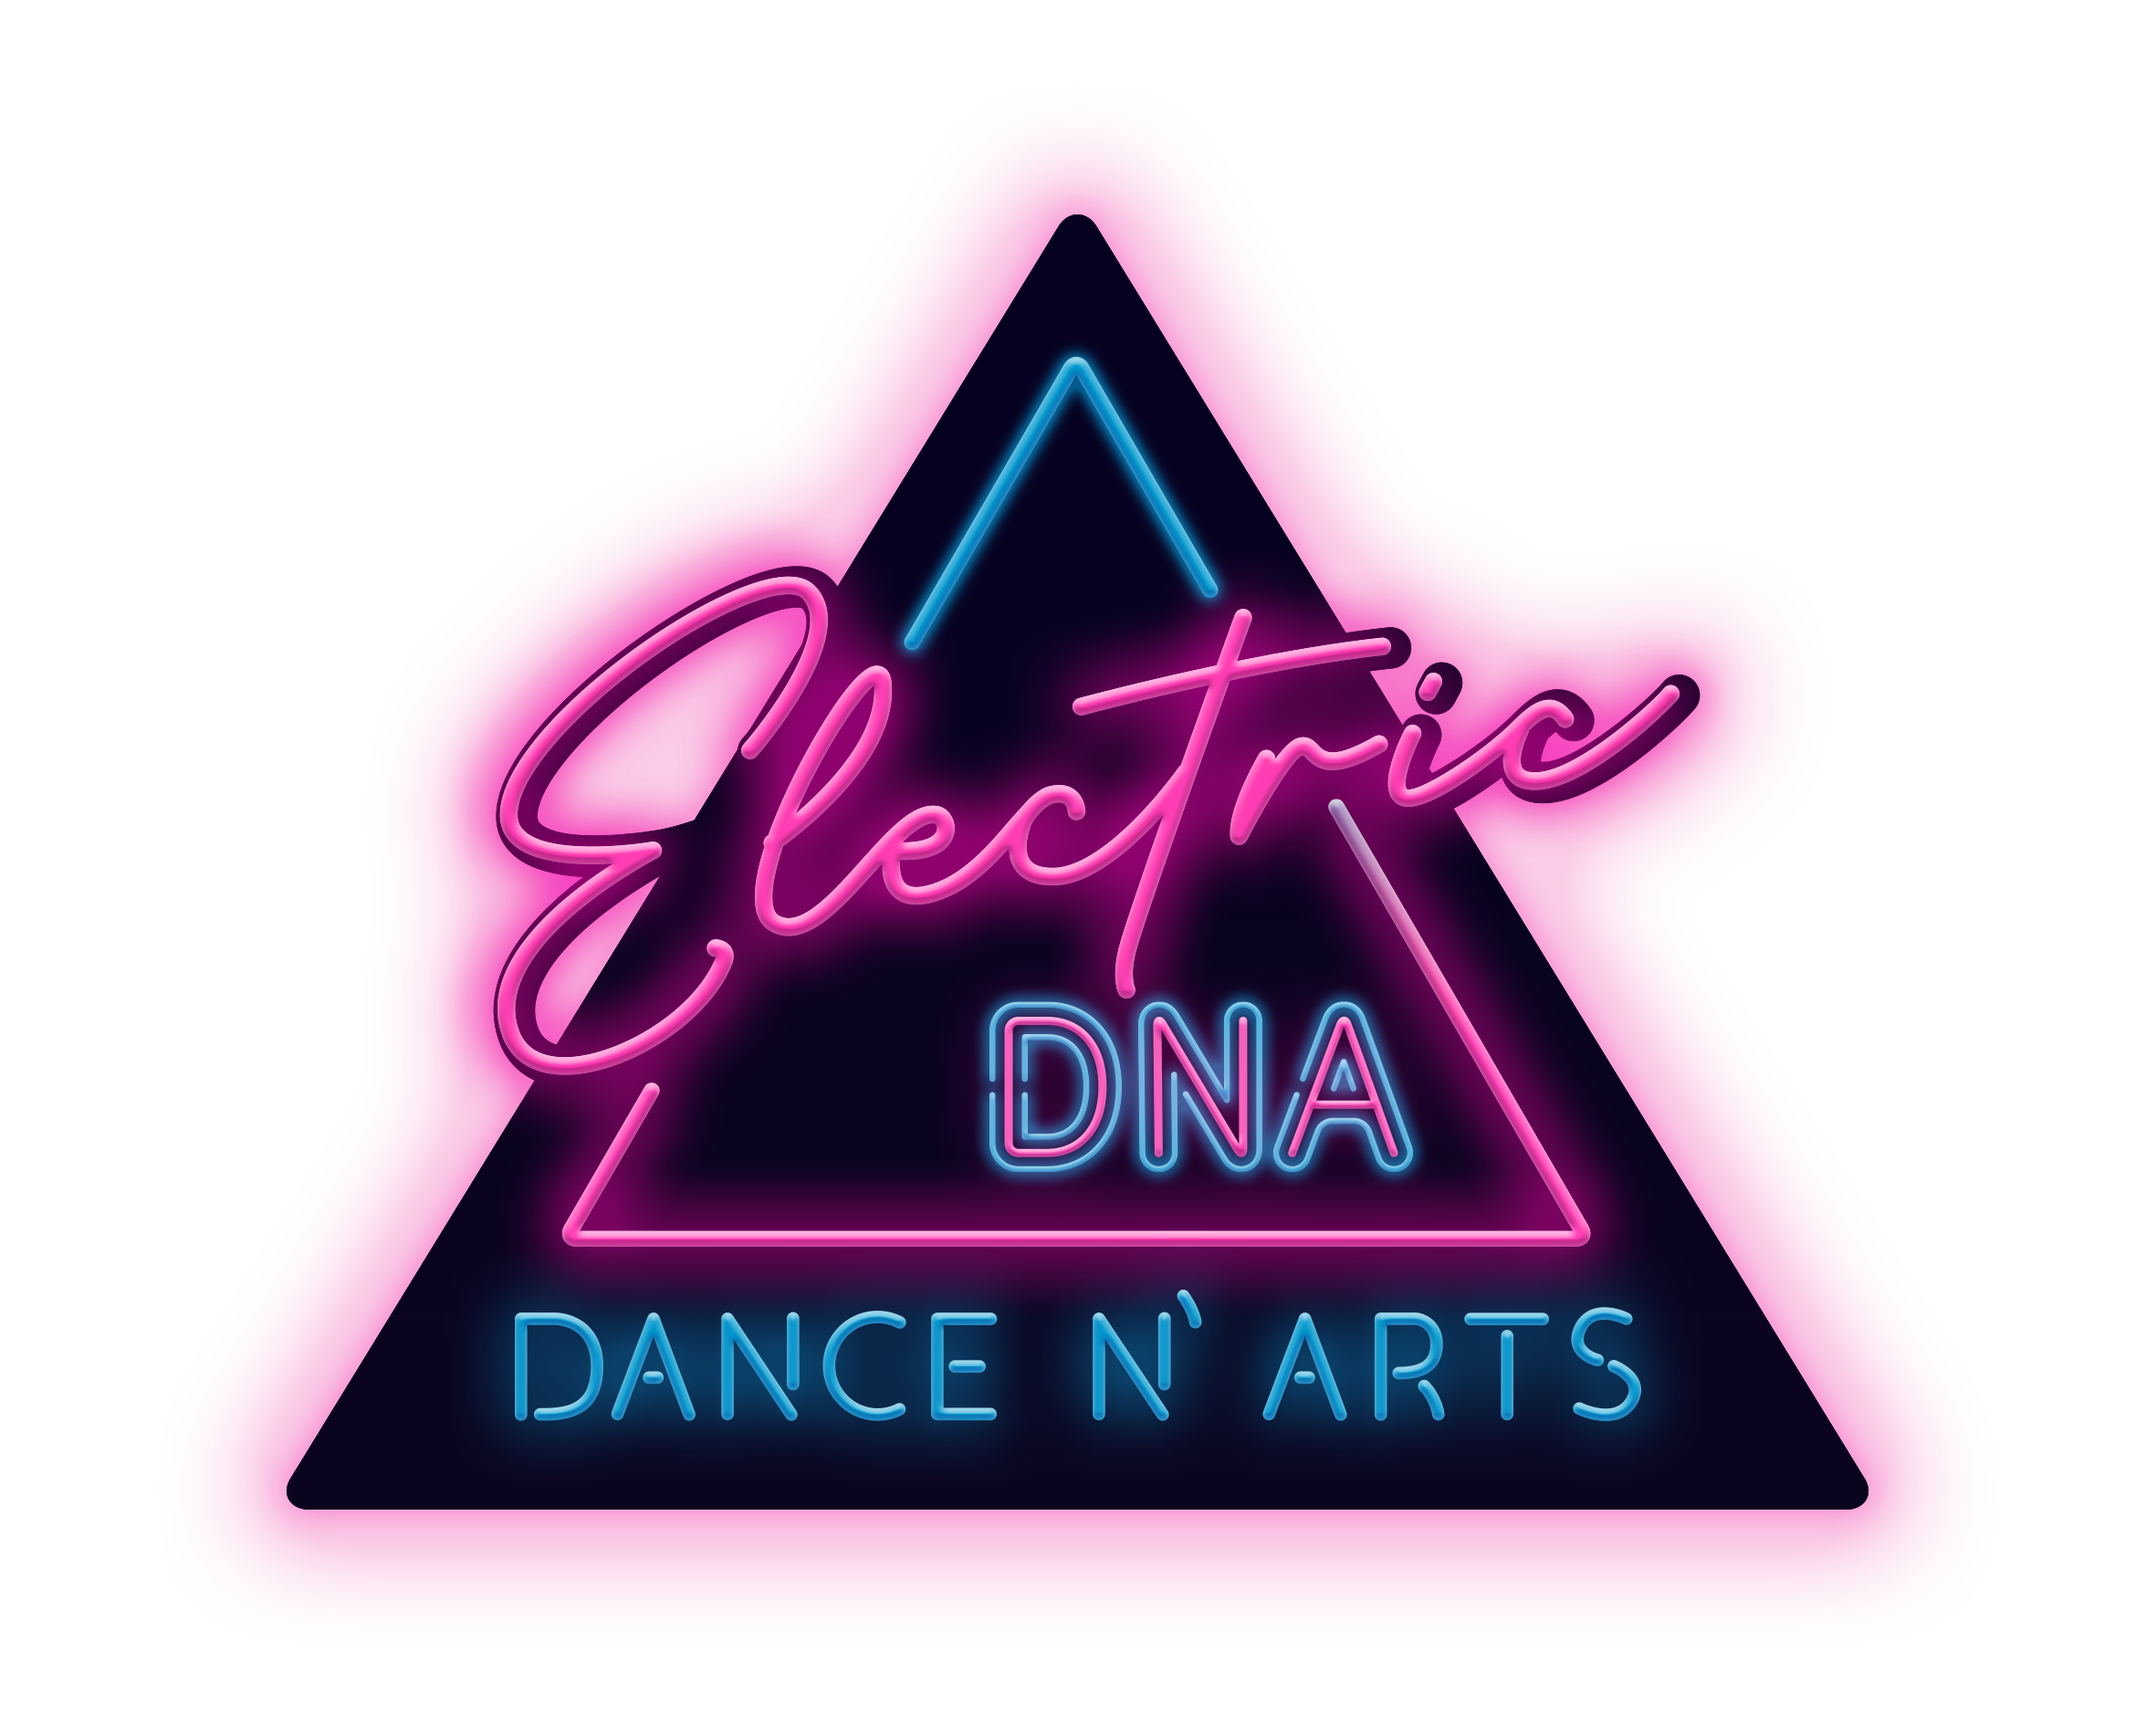 Electric DNA